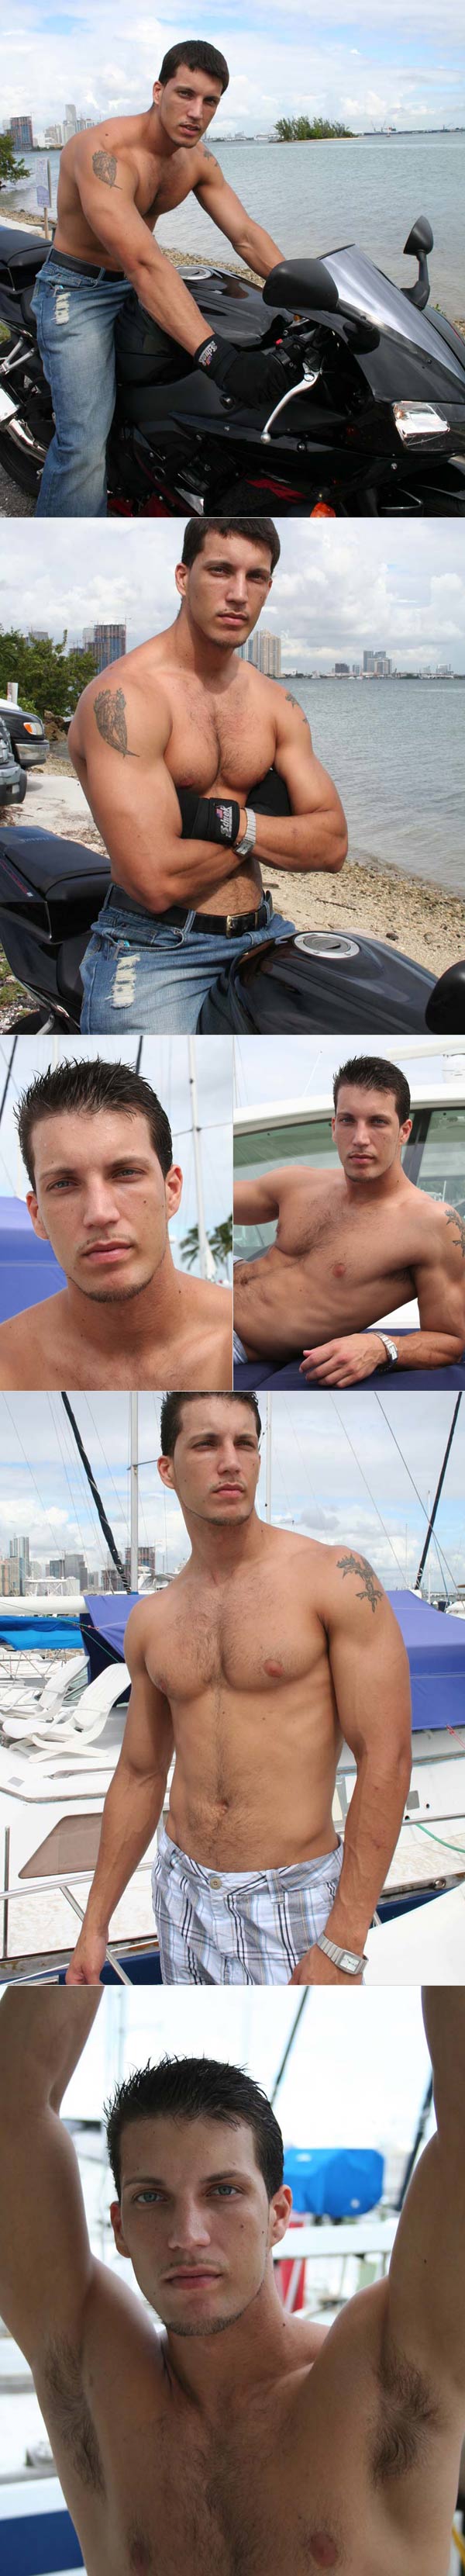 Adam (Straight Muscle Hunk Showing Off Huge Dick on Boat) at ManAvenue